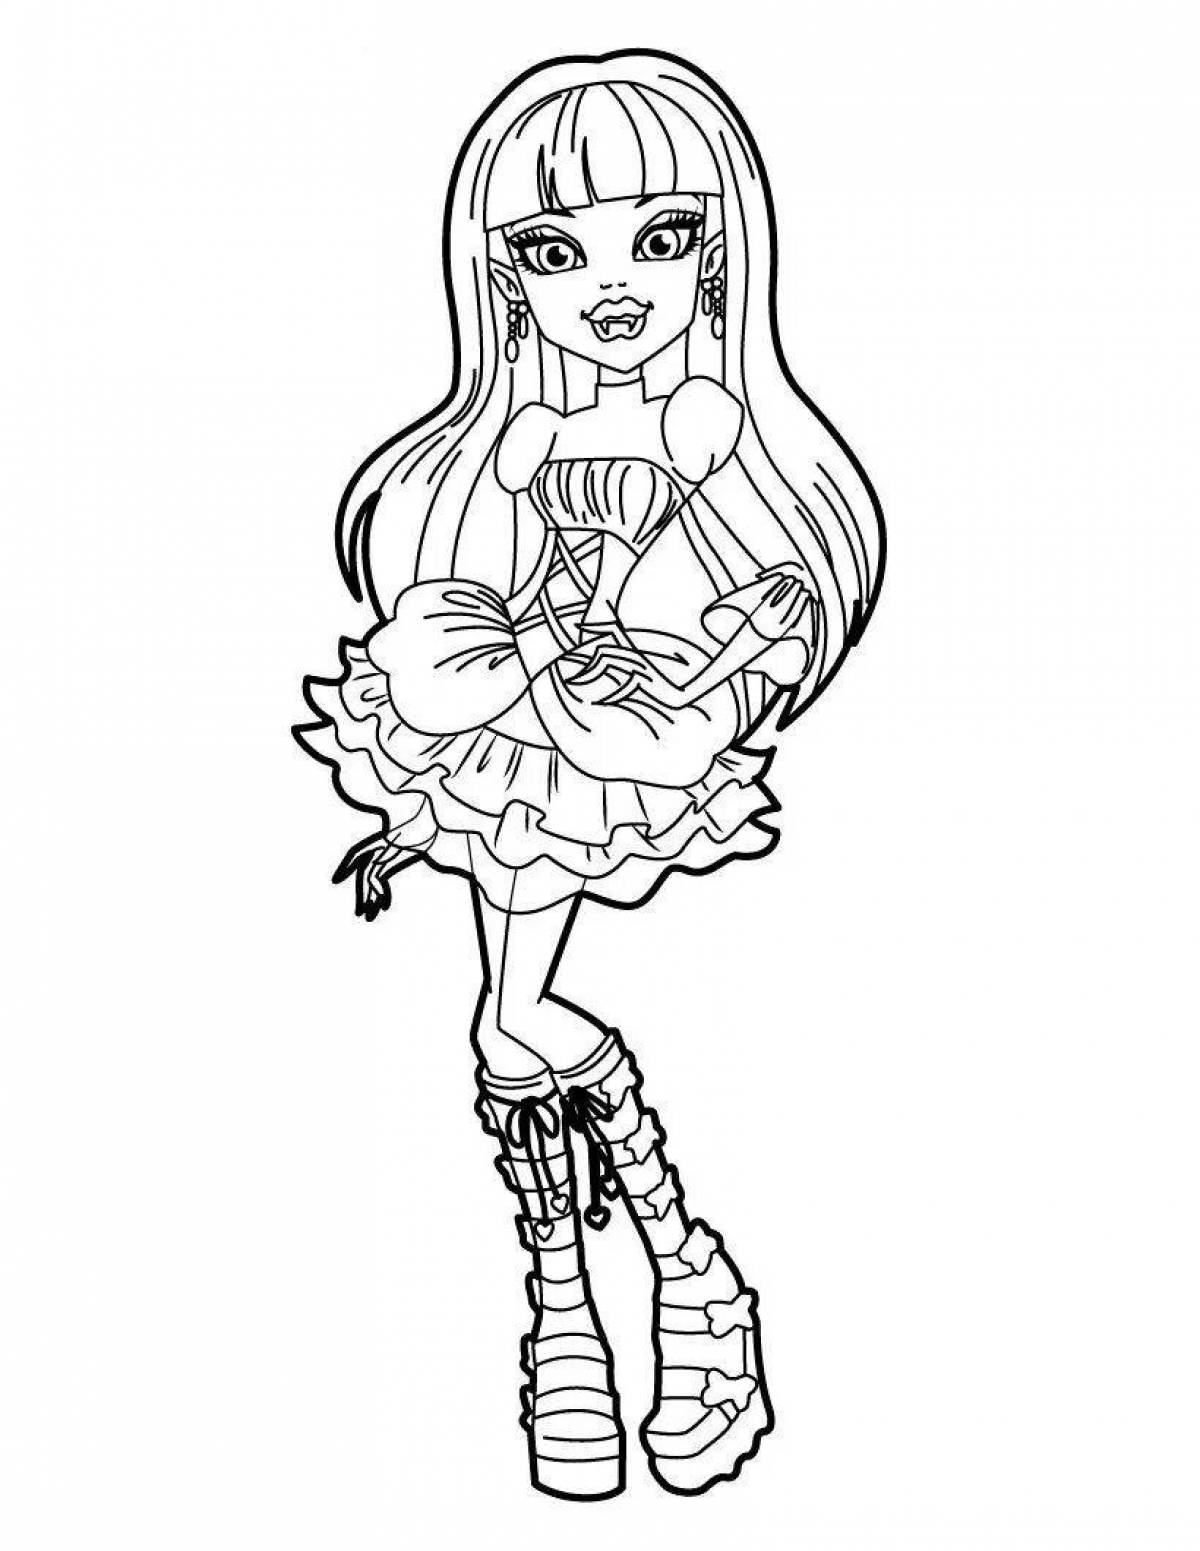 Monster high playful coloring for girls